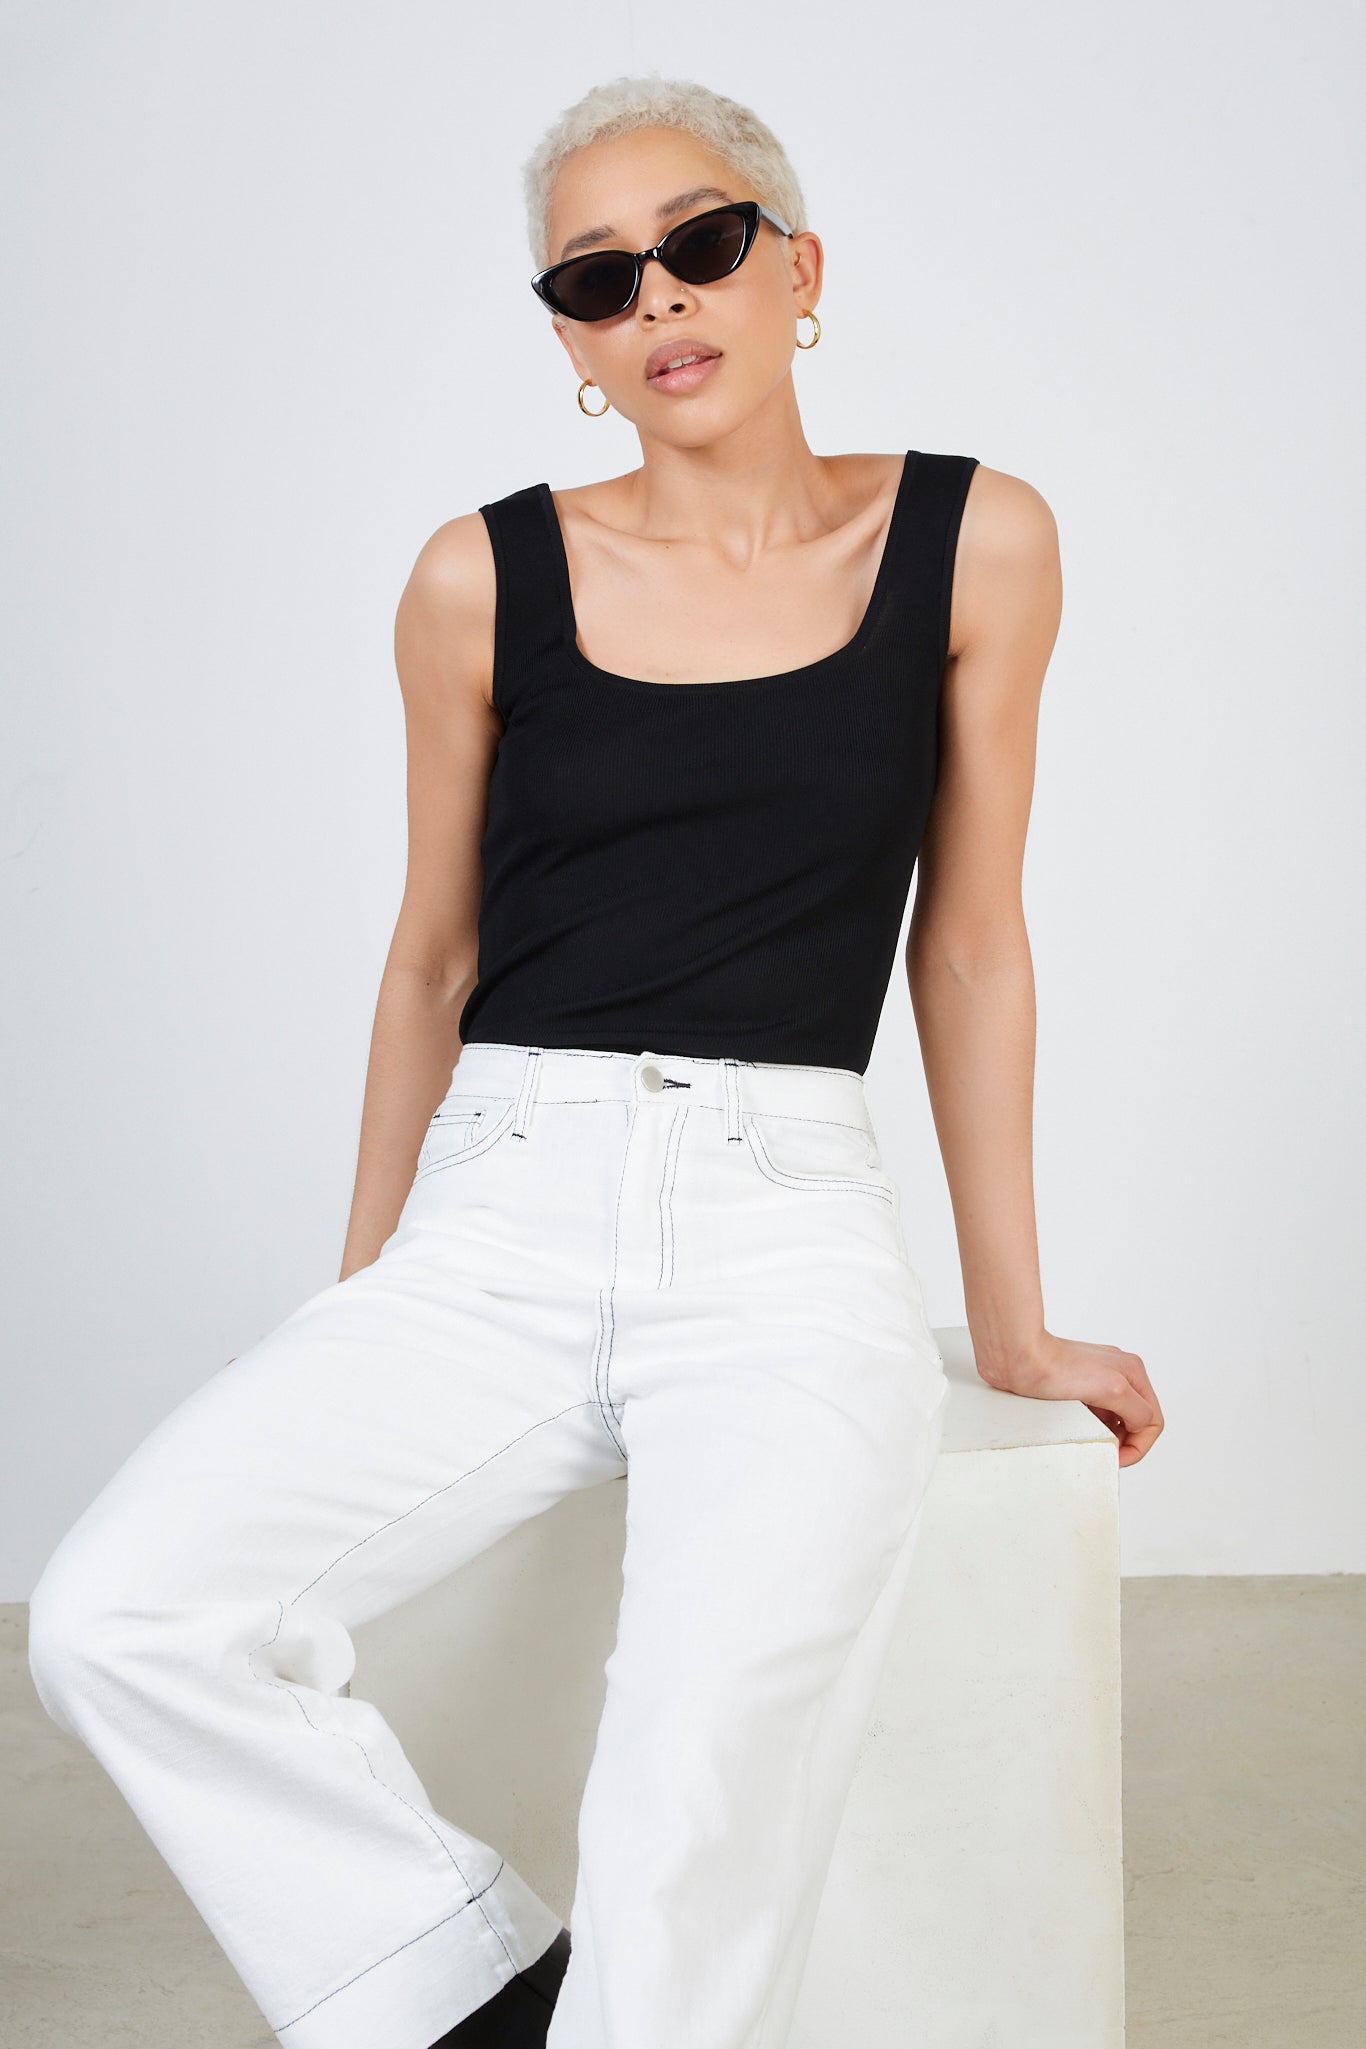 White and black lightweight wide leg contrast stitch jeans